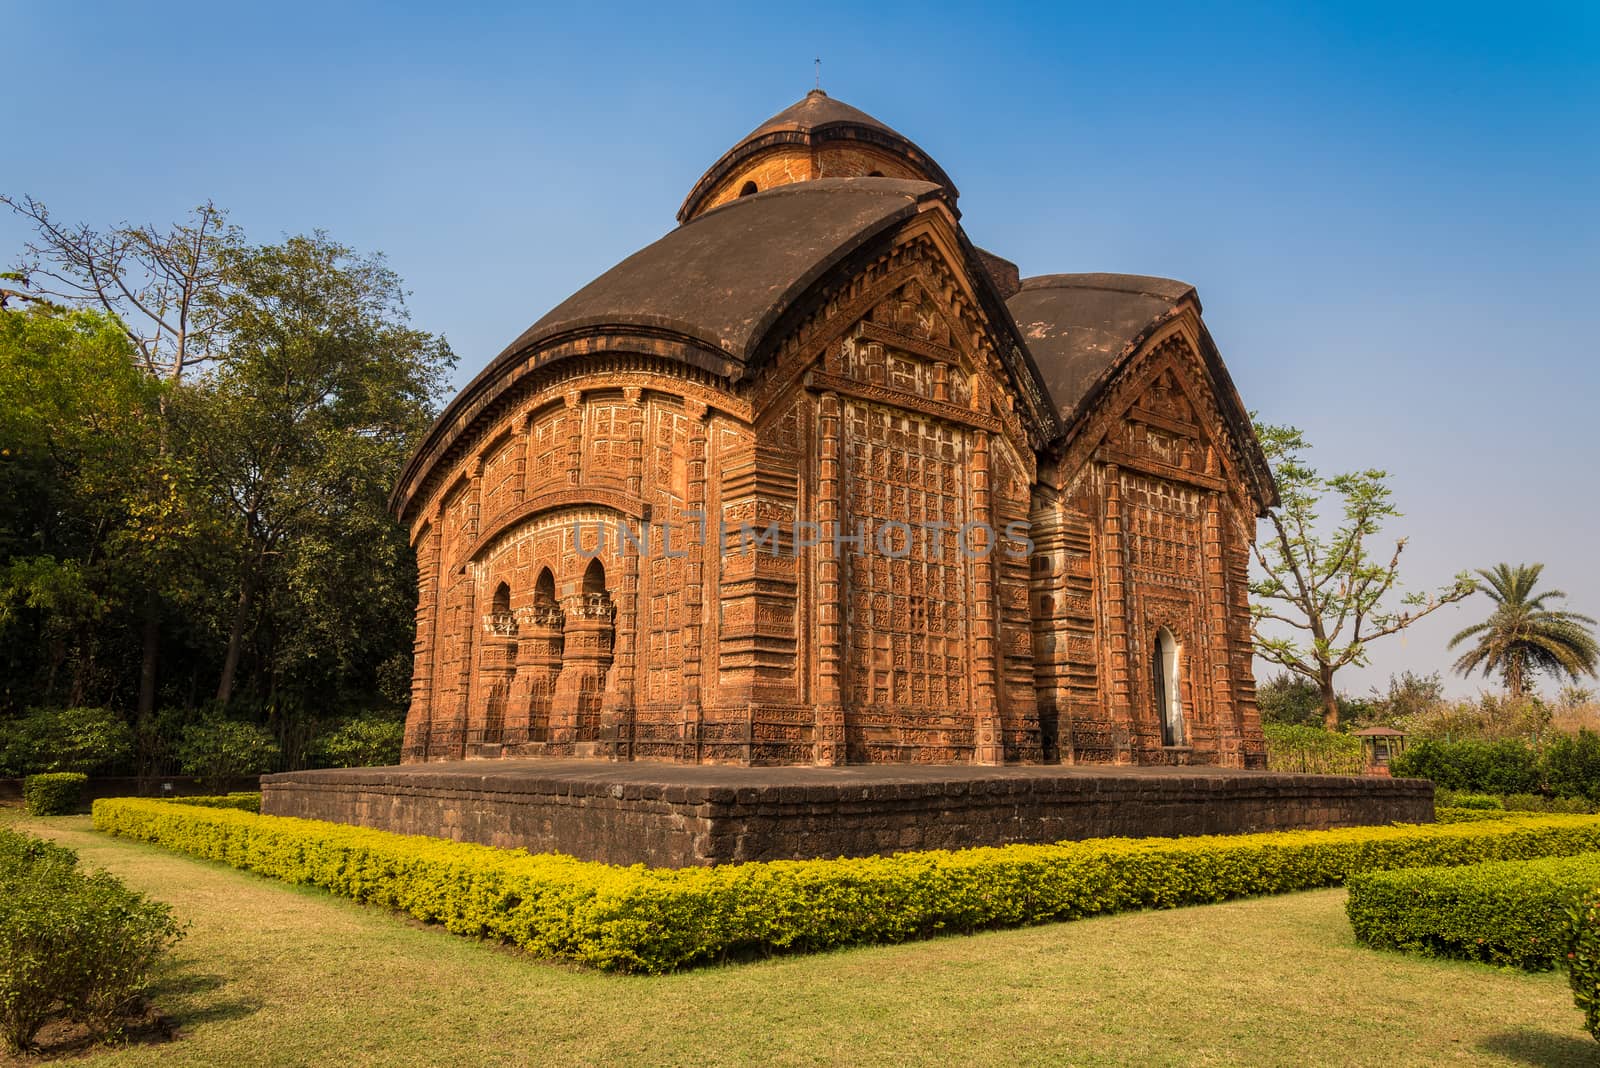 The historically famous Jorbangla temple in Bishnupur established in 17th century